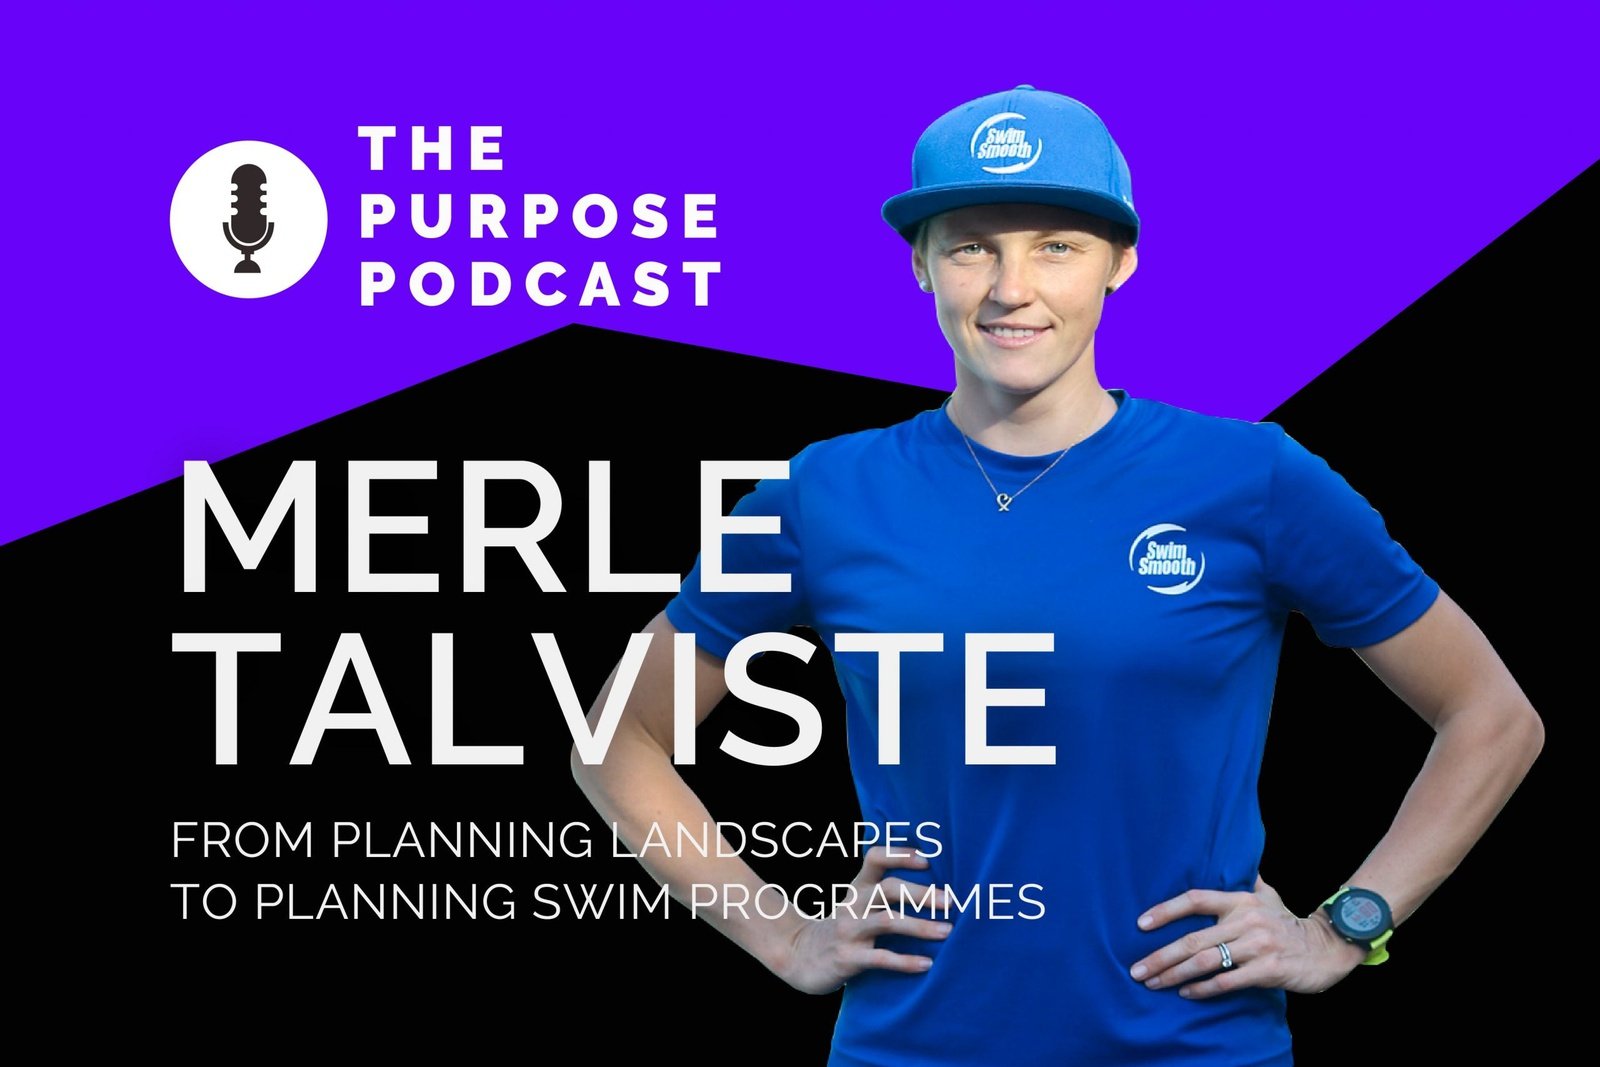 The PURPOSE Podcast: Merle Talviste, from planning landscapes to planning swim programmes